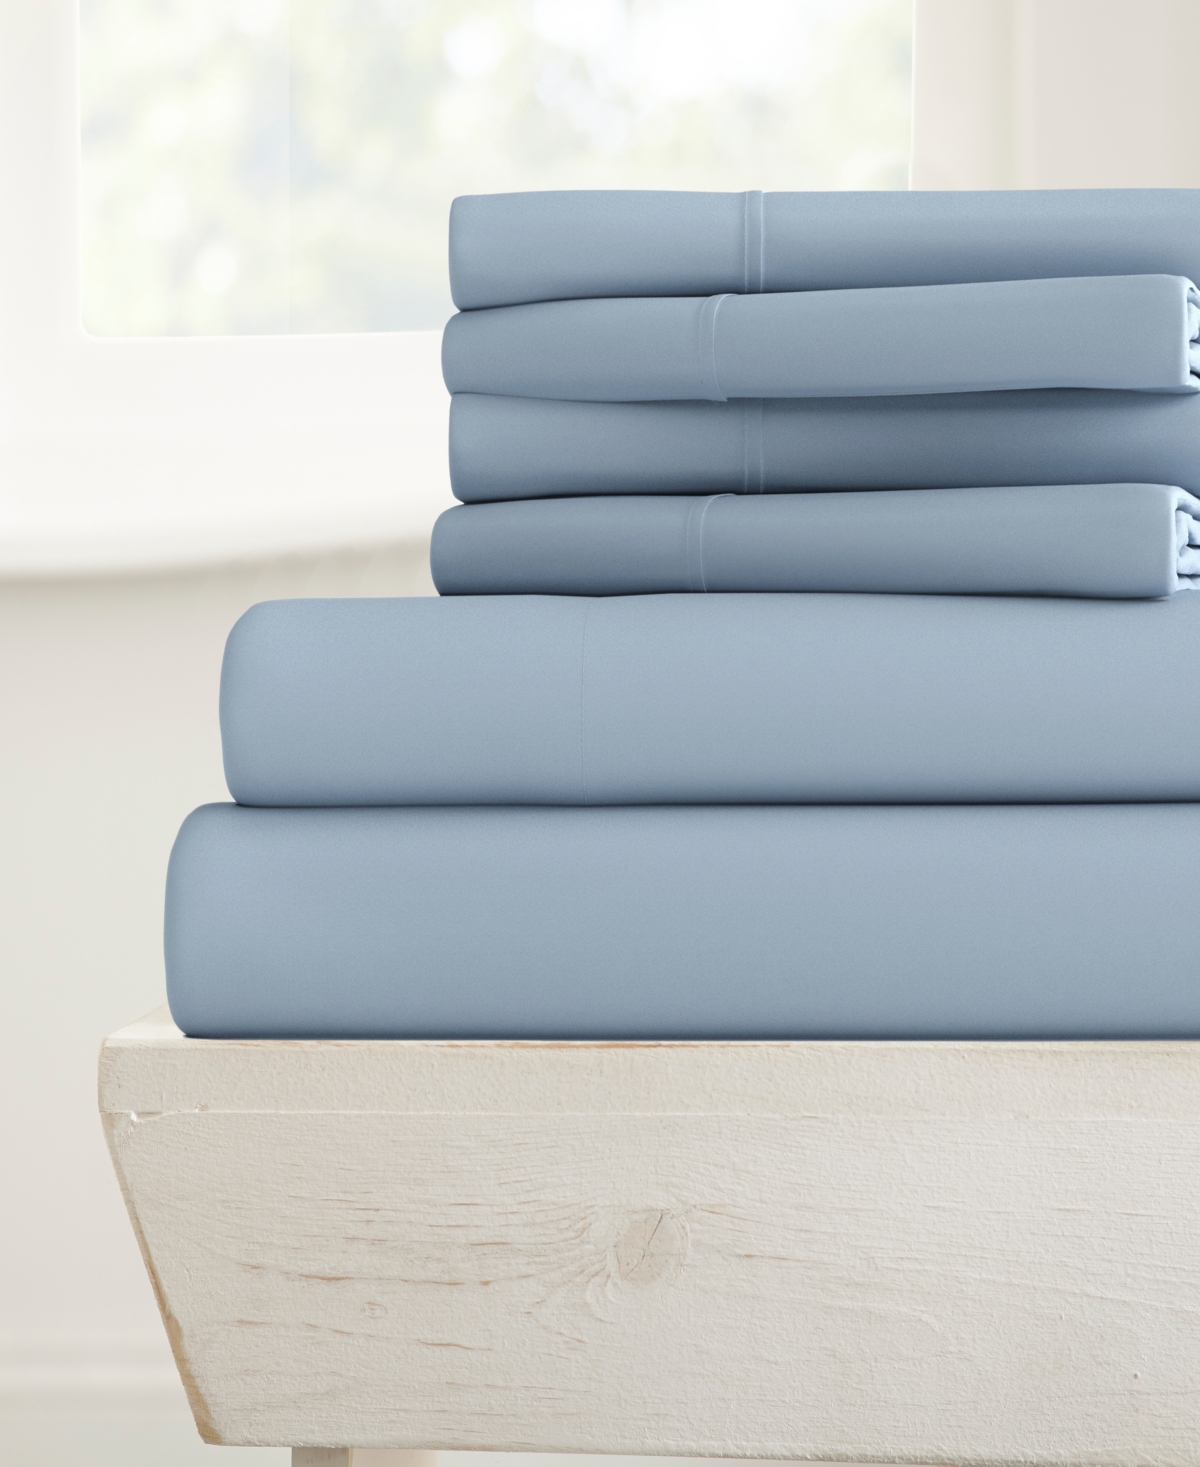 Ienjoy Home Solids In Style By The Home Collection 6 Piece Bed Sheet Set, Queen Bedding In Light Blue